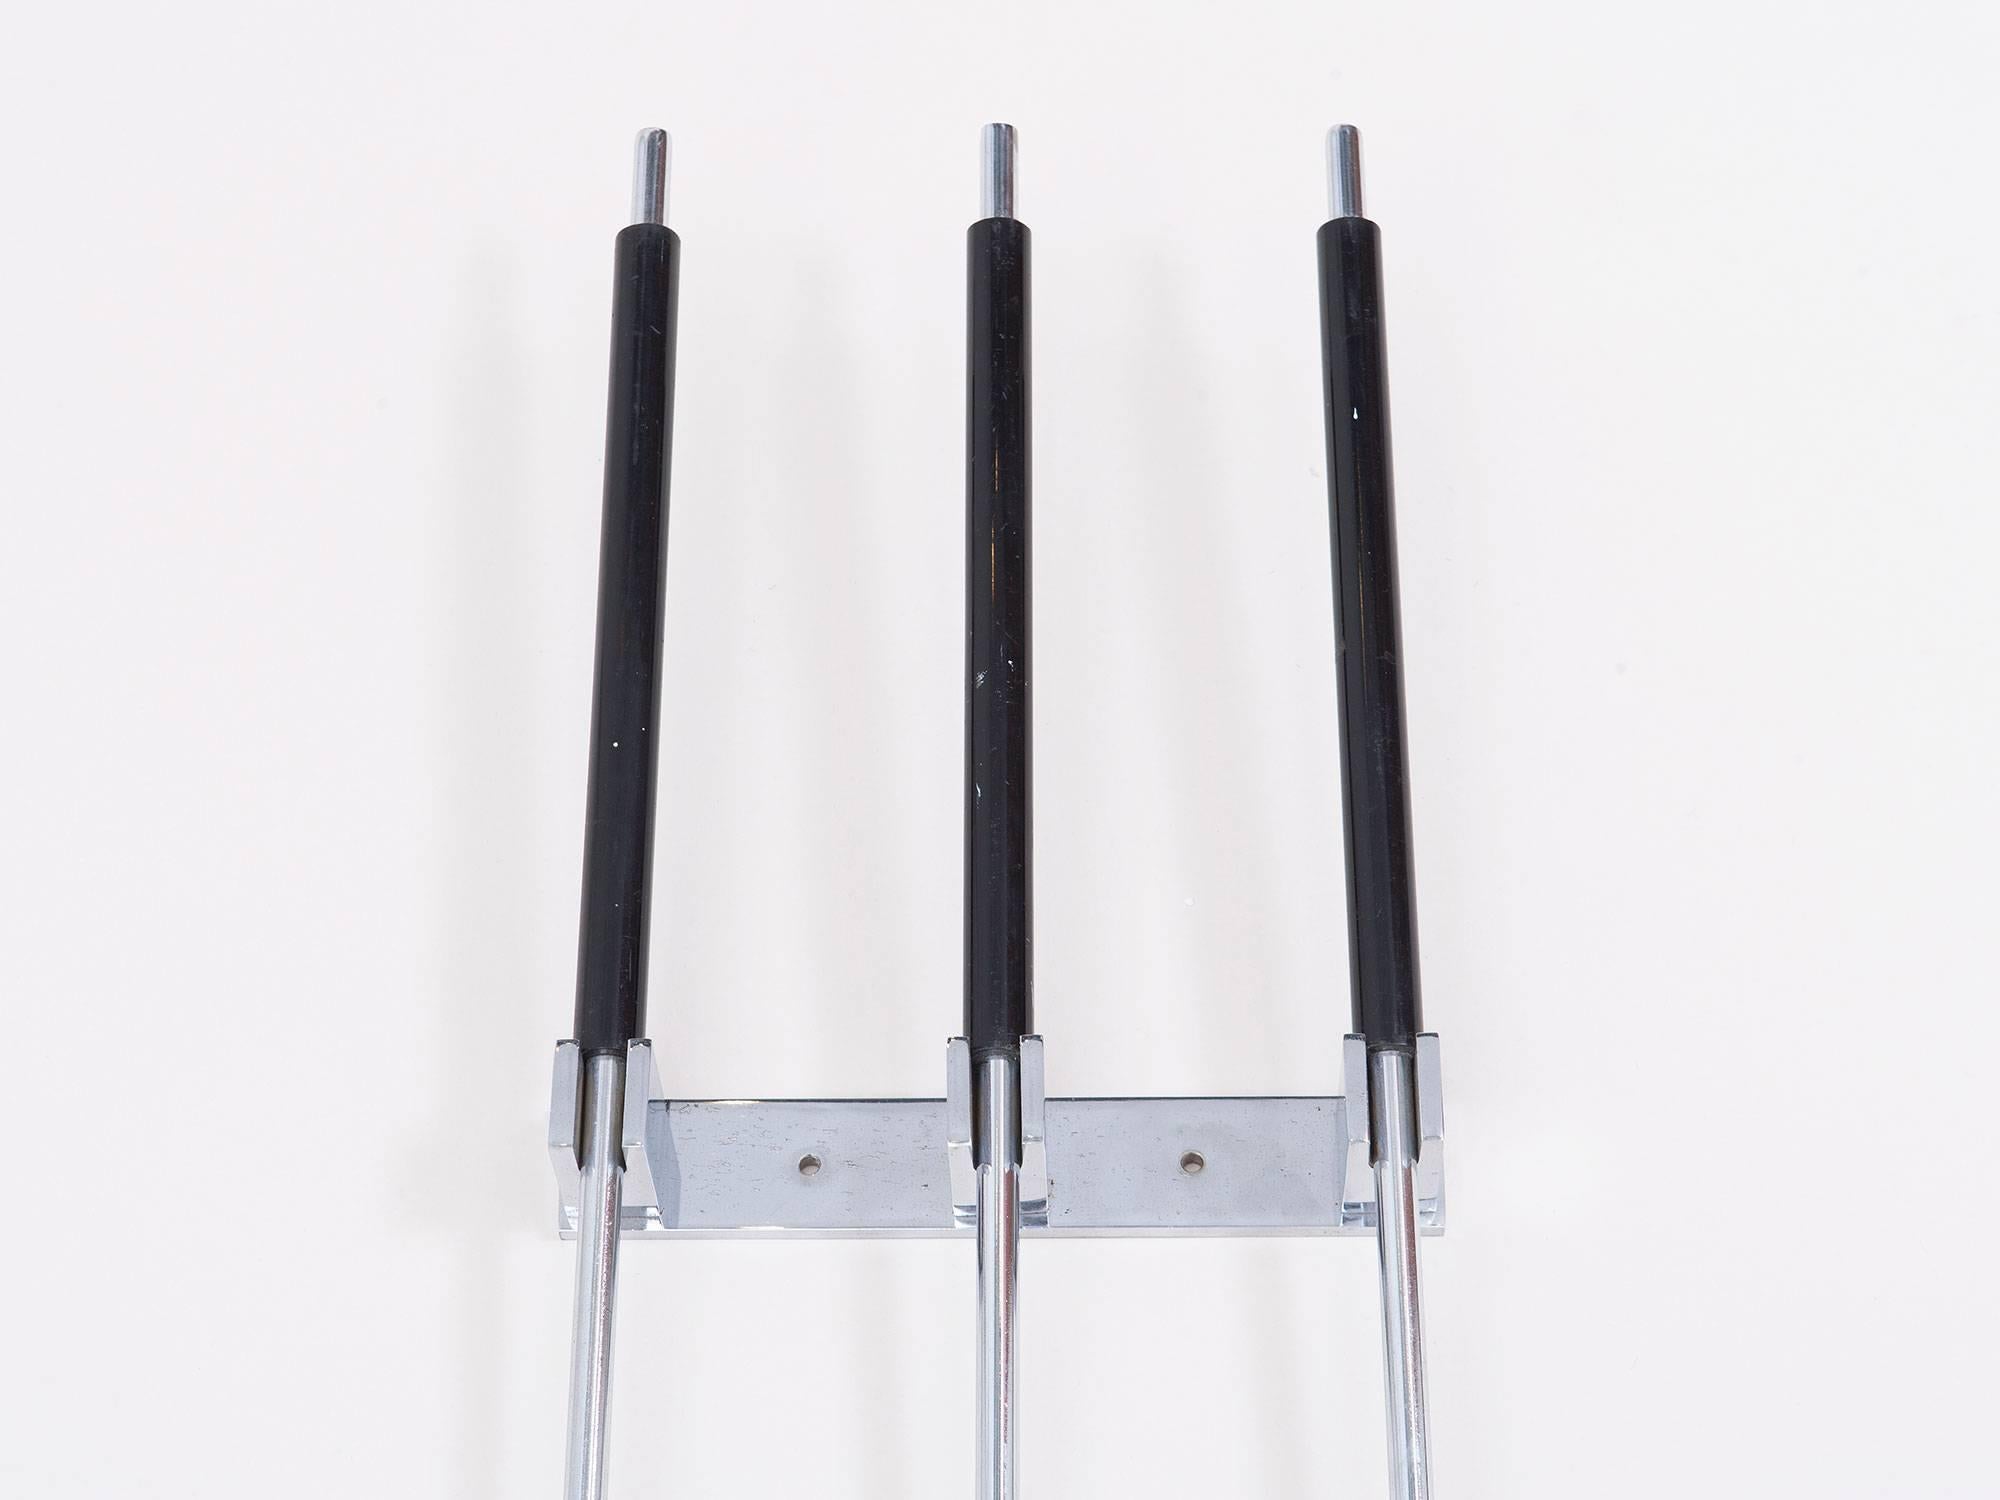 Unusual three-piece set of chrome-plated fireplace tools that hang on the wall, made by the Italian company Albrizi in the 1960s. Consists of a brush, poker and shovel with black lacquered handles and a chrome a wall mount.